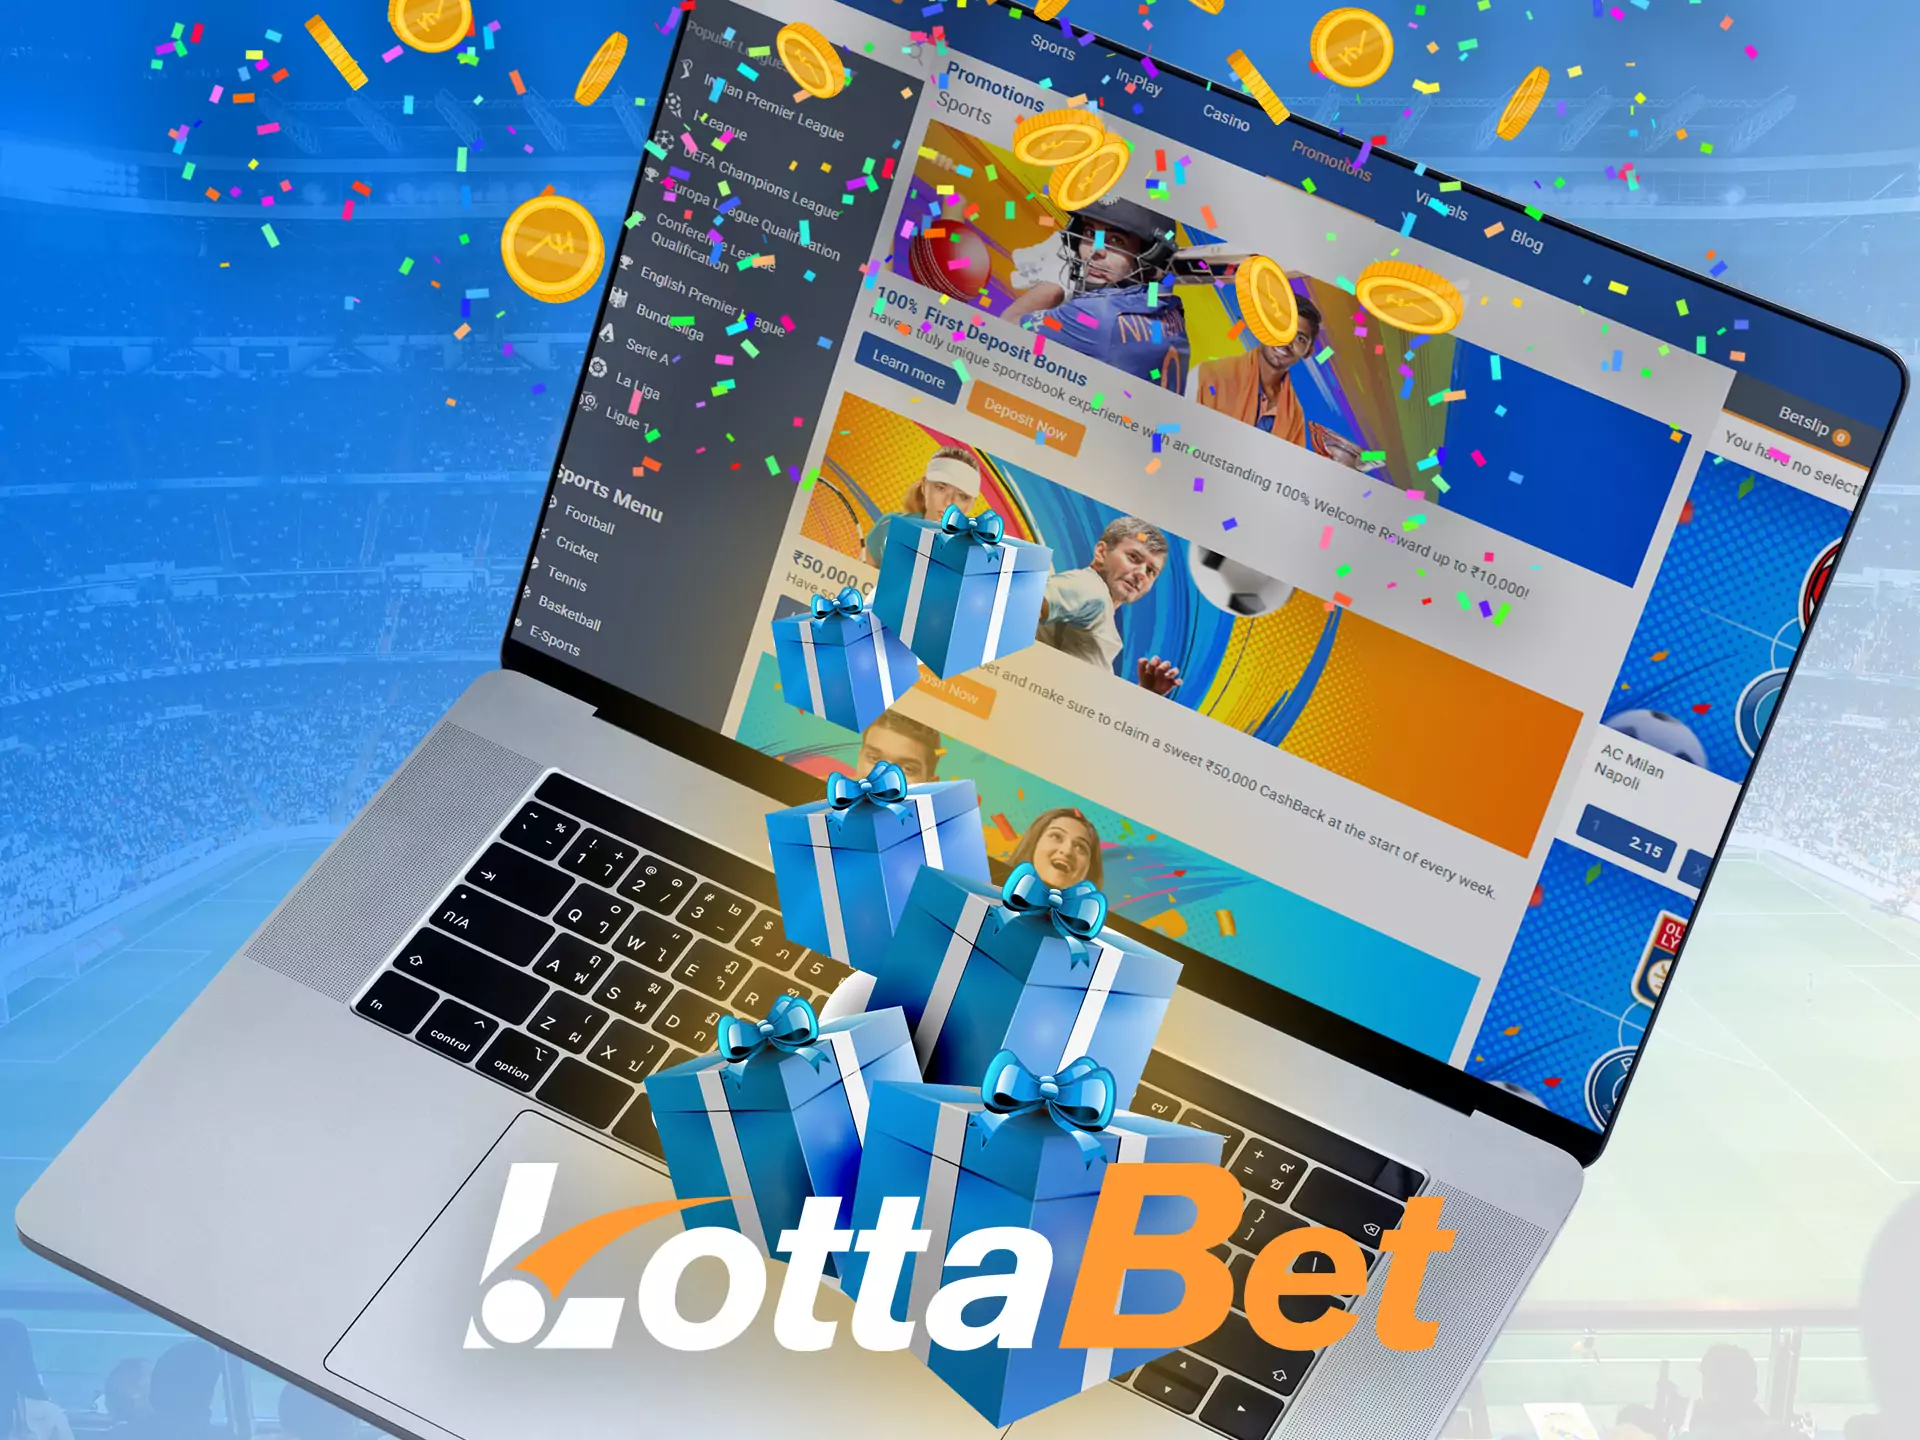 Besides promotions and bonuses, from time to time new promo codes appear on the Lottabet site.